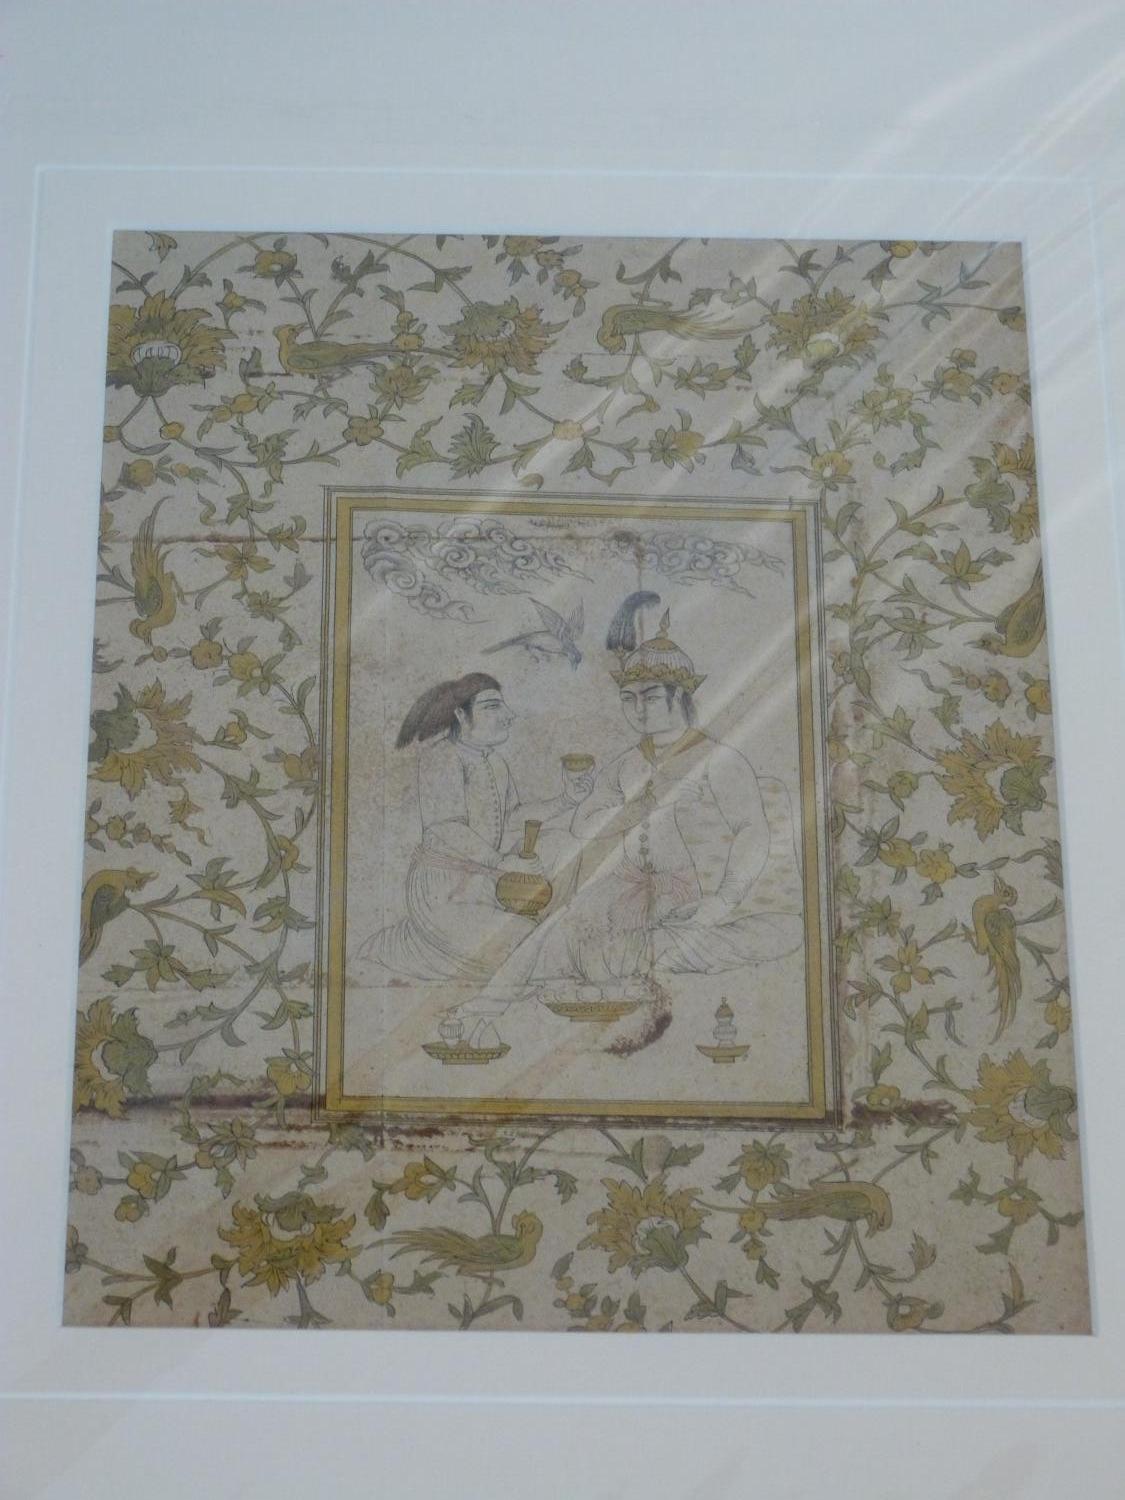 A 19th century Persian Safavid style miniature painting on parchment depicting a servant offering